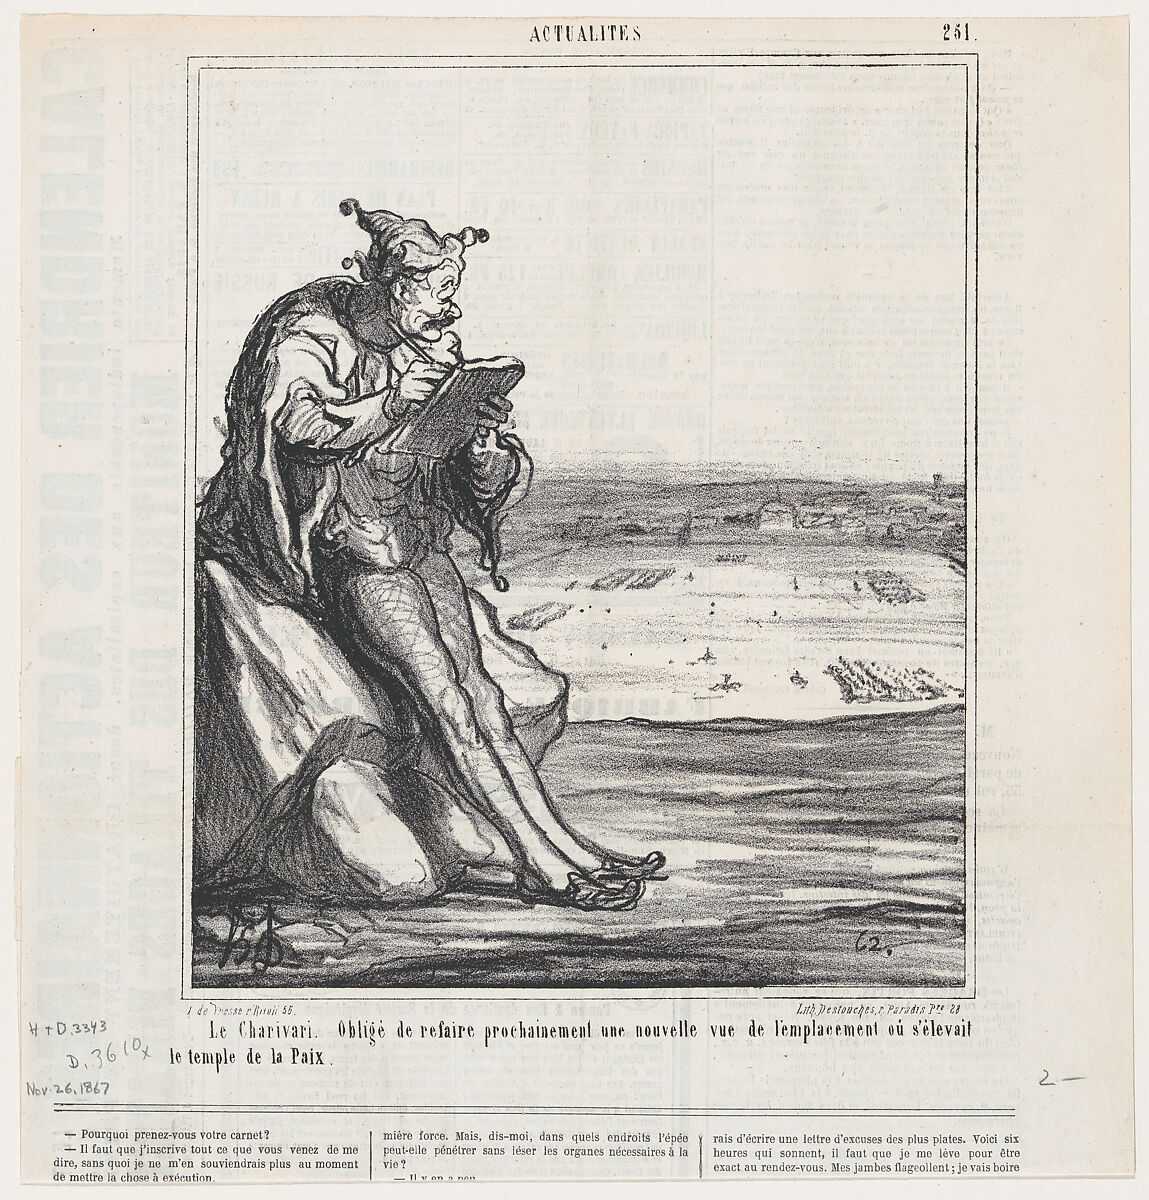 The Charivari. Forced to draw a new map of an area now used for manoeuvres, which used to be the location of the "Temple of Peace," from 'News of the day,' published in Le Charivari, November 26, 1867, Honoré Daumier (French, Marseilles 1808–1879 Valmondois), Lithograph on newsprint; third state of three (Delteil) 